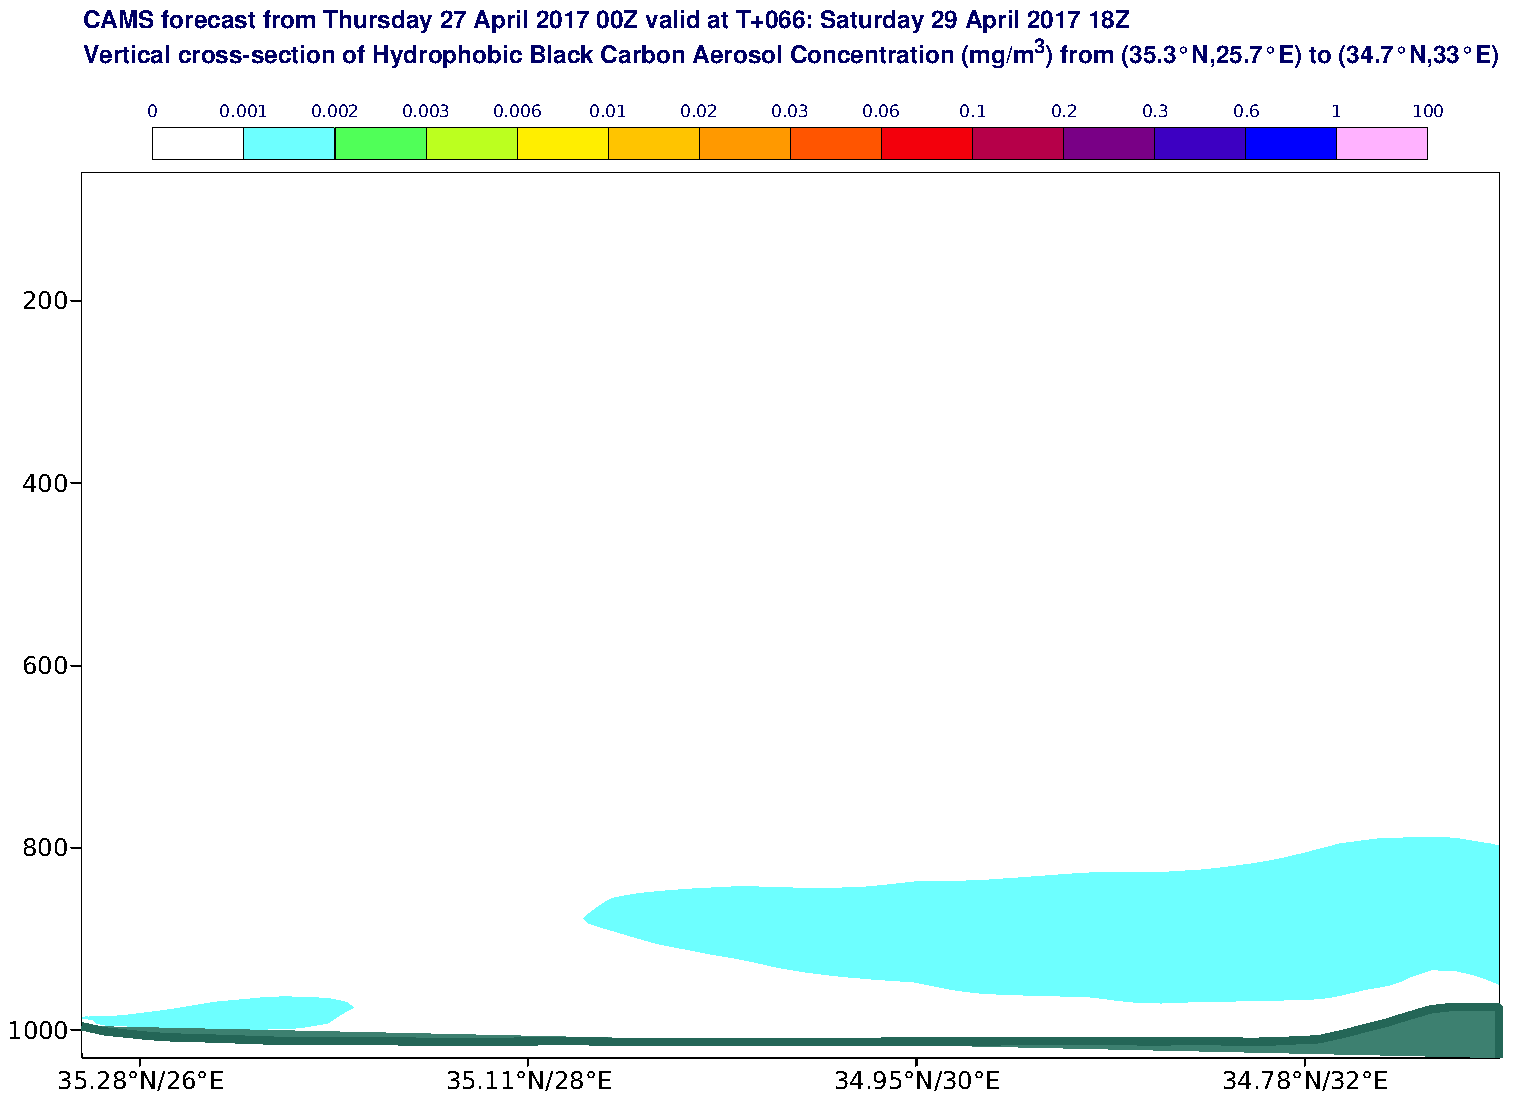 Vertical cross-section of Hydrophobic Black Carbon Aerosol Concentration (mg/m3) valid at T66 - 2017-04-29 18:00